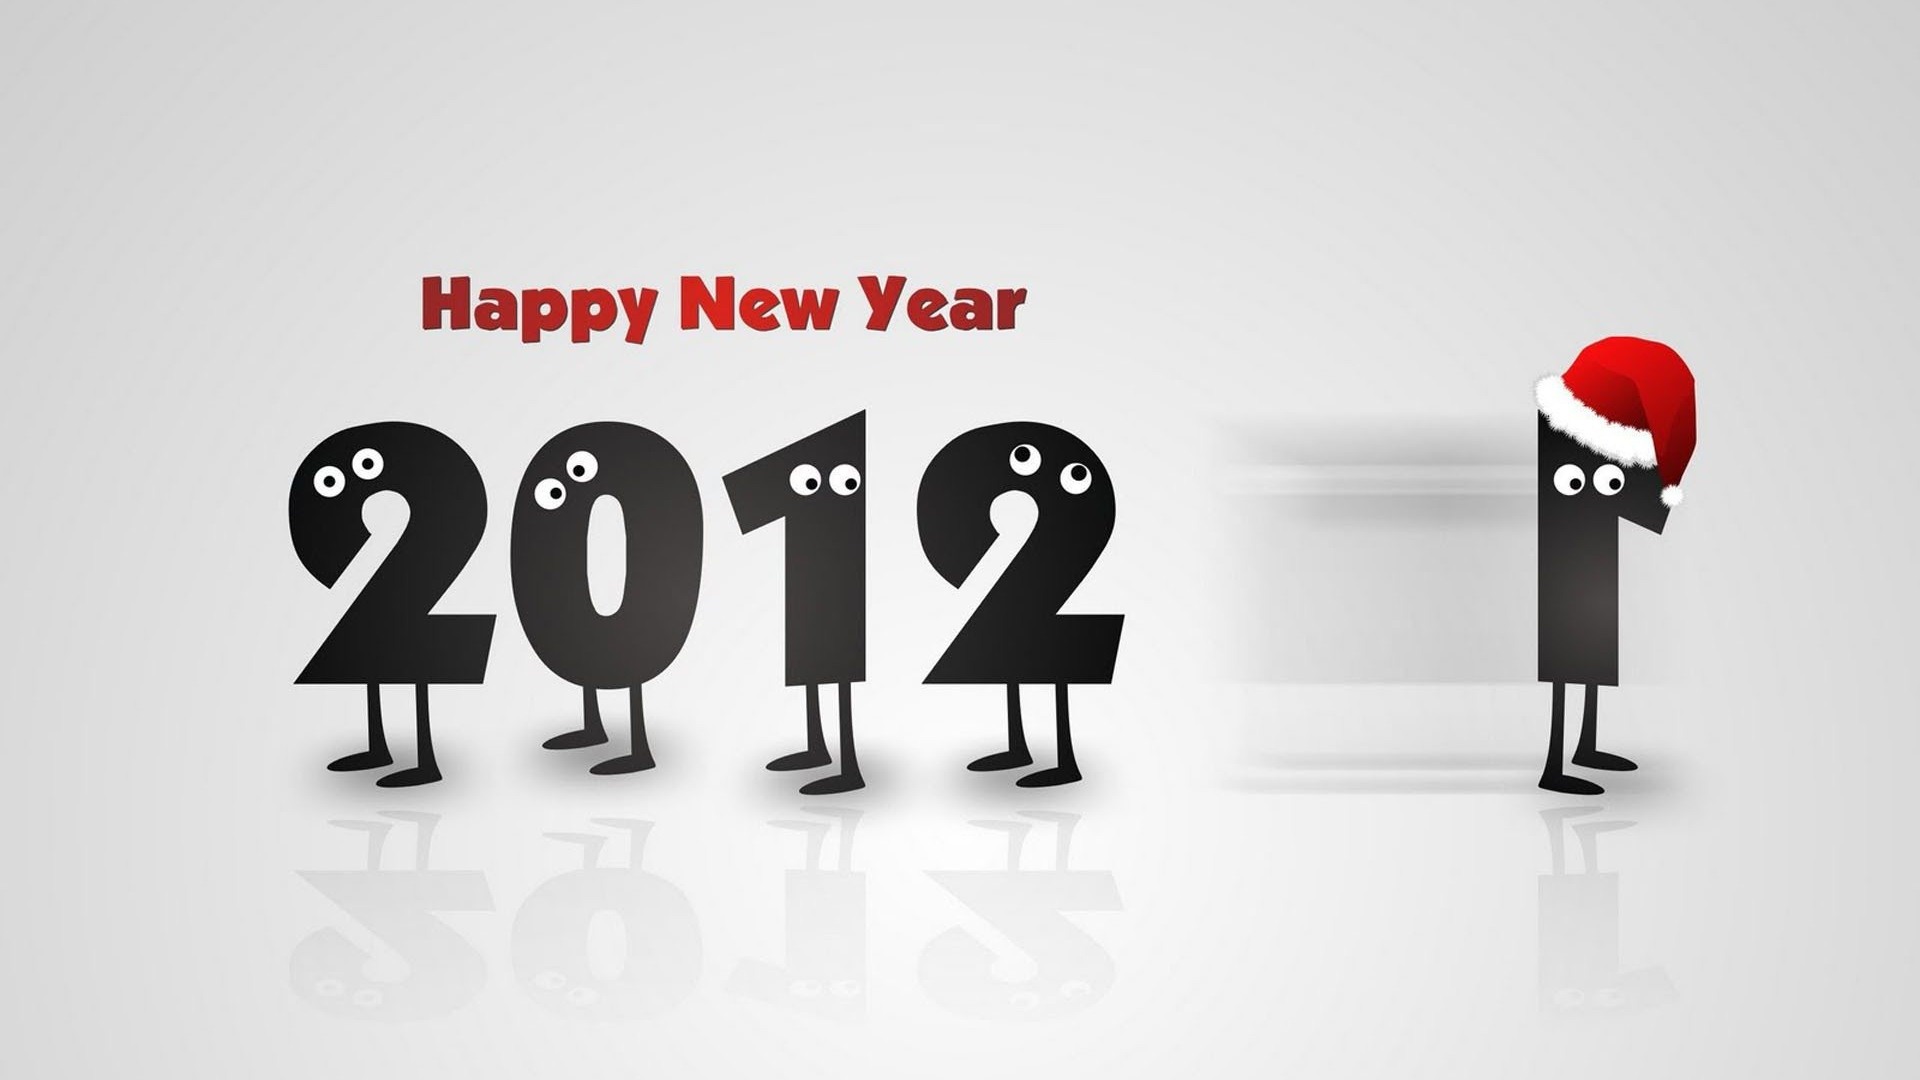 2012 New Year wallpapers (2) #19 - 1920x1080